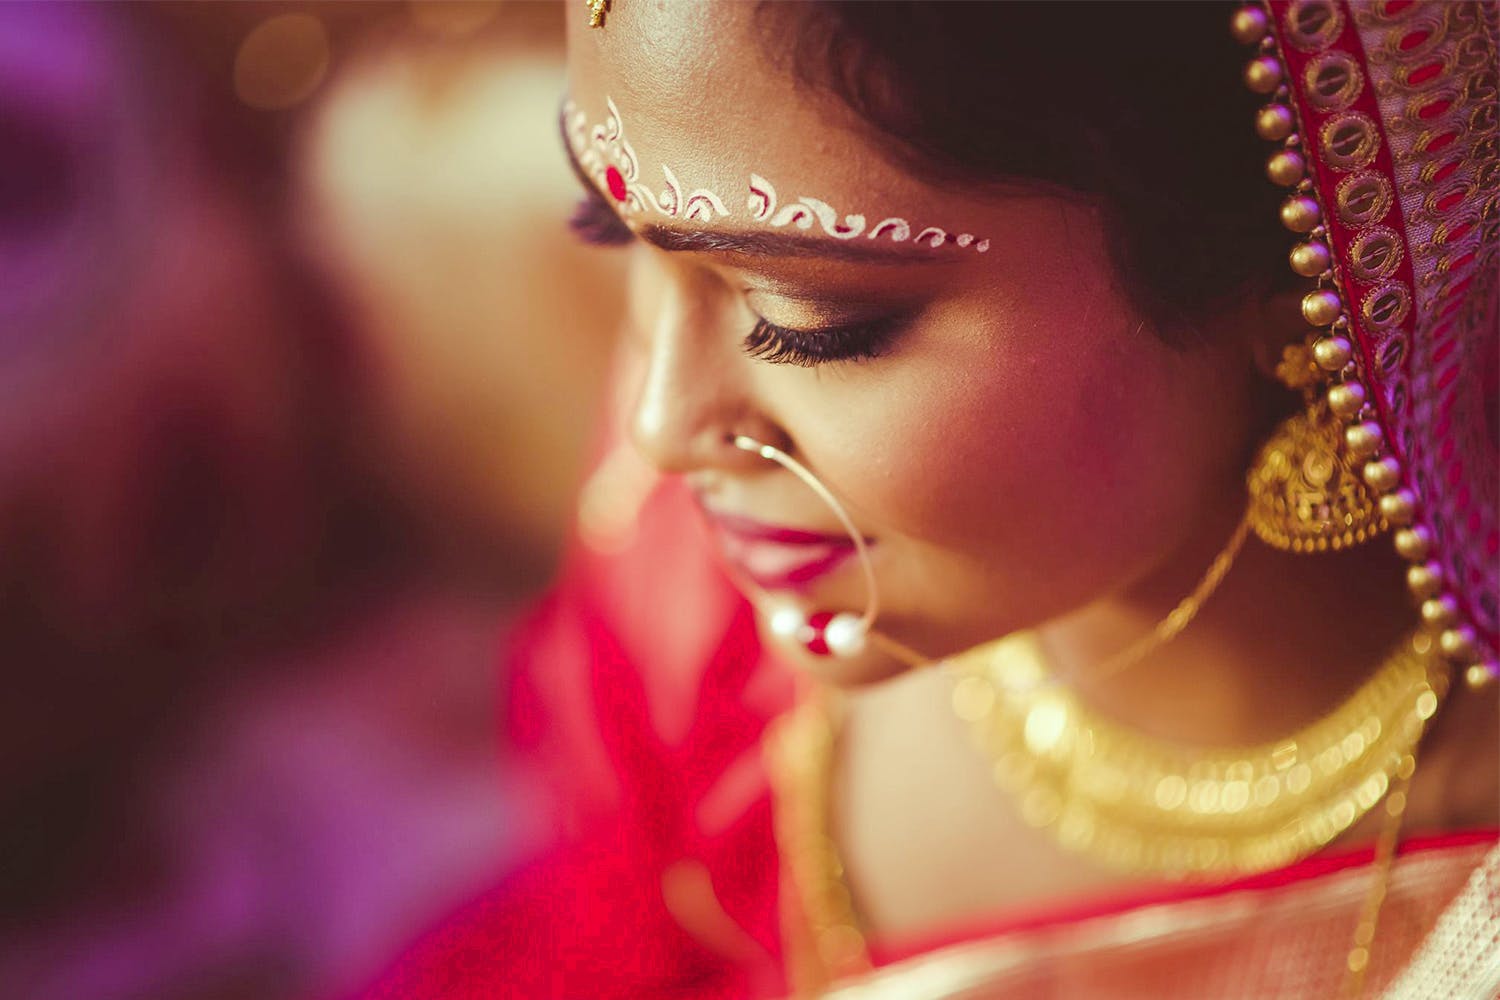 Red,Skin,Beauty,Pink,Lady,Bride,Nose,Tradition,Lip,Close-up